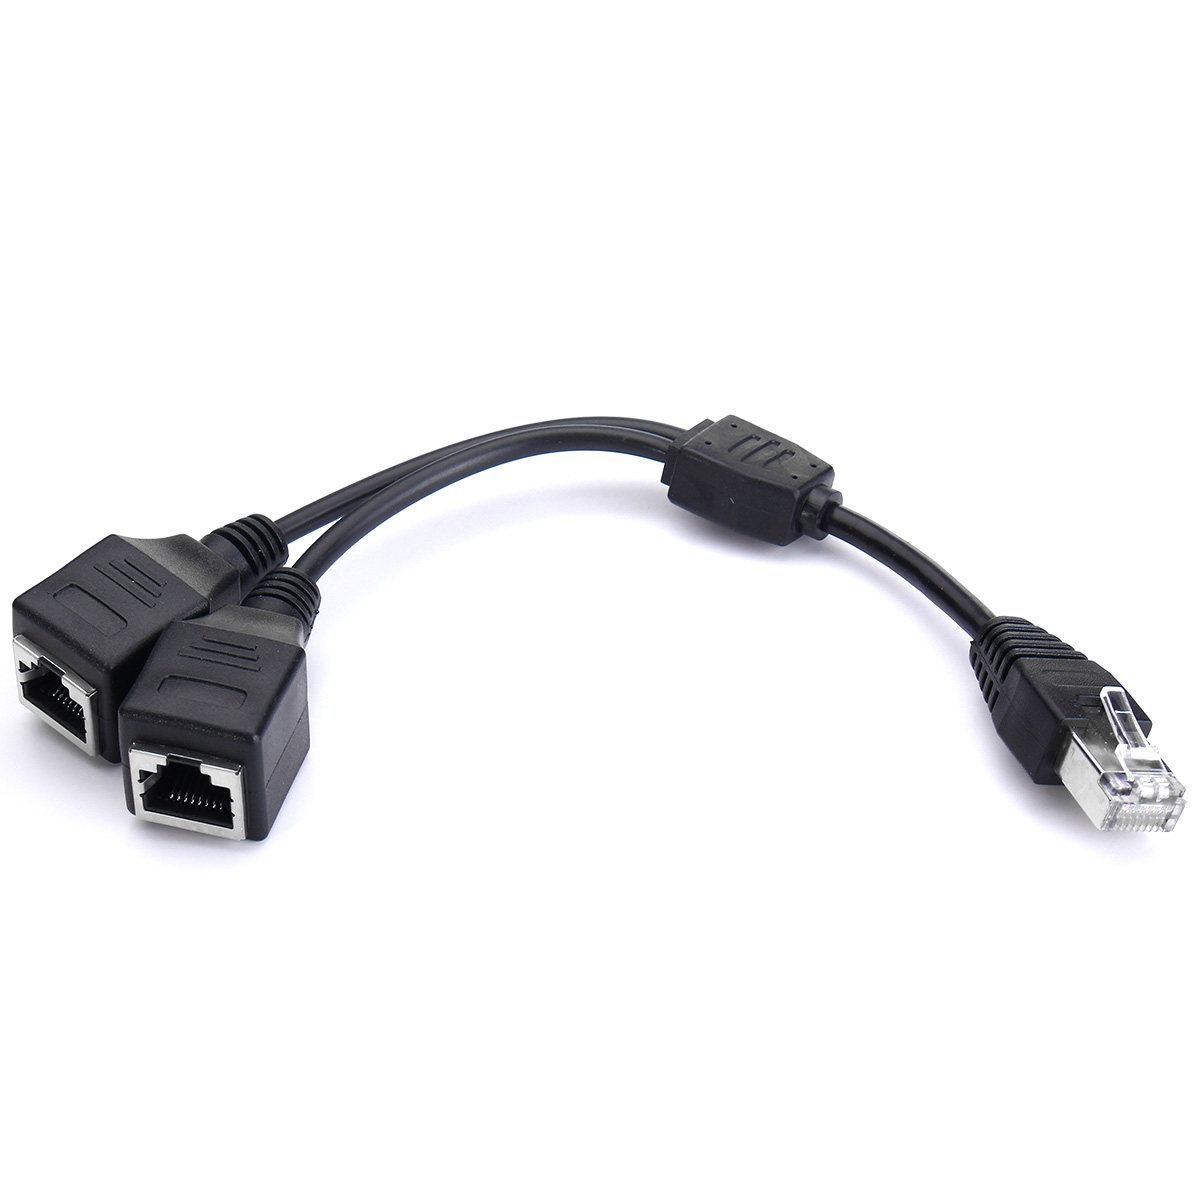 

Cat 5 Lan Ethernet RJ45 Male To Dual Female Splitter Extension Cable Adapter